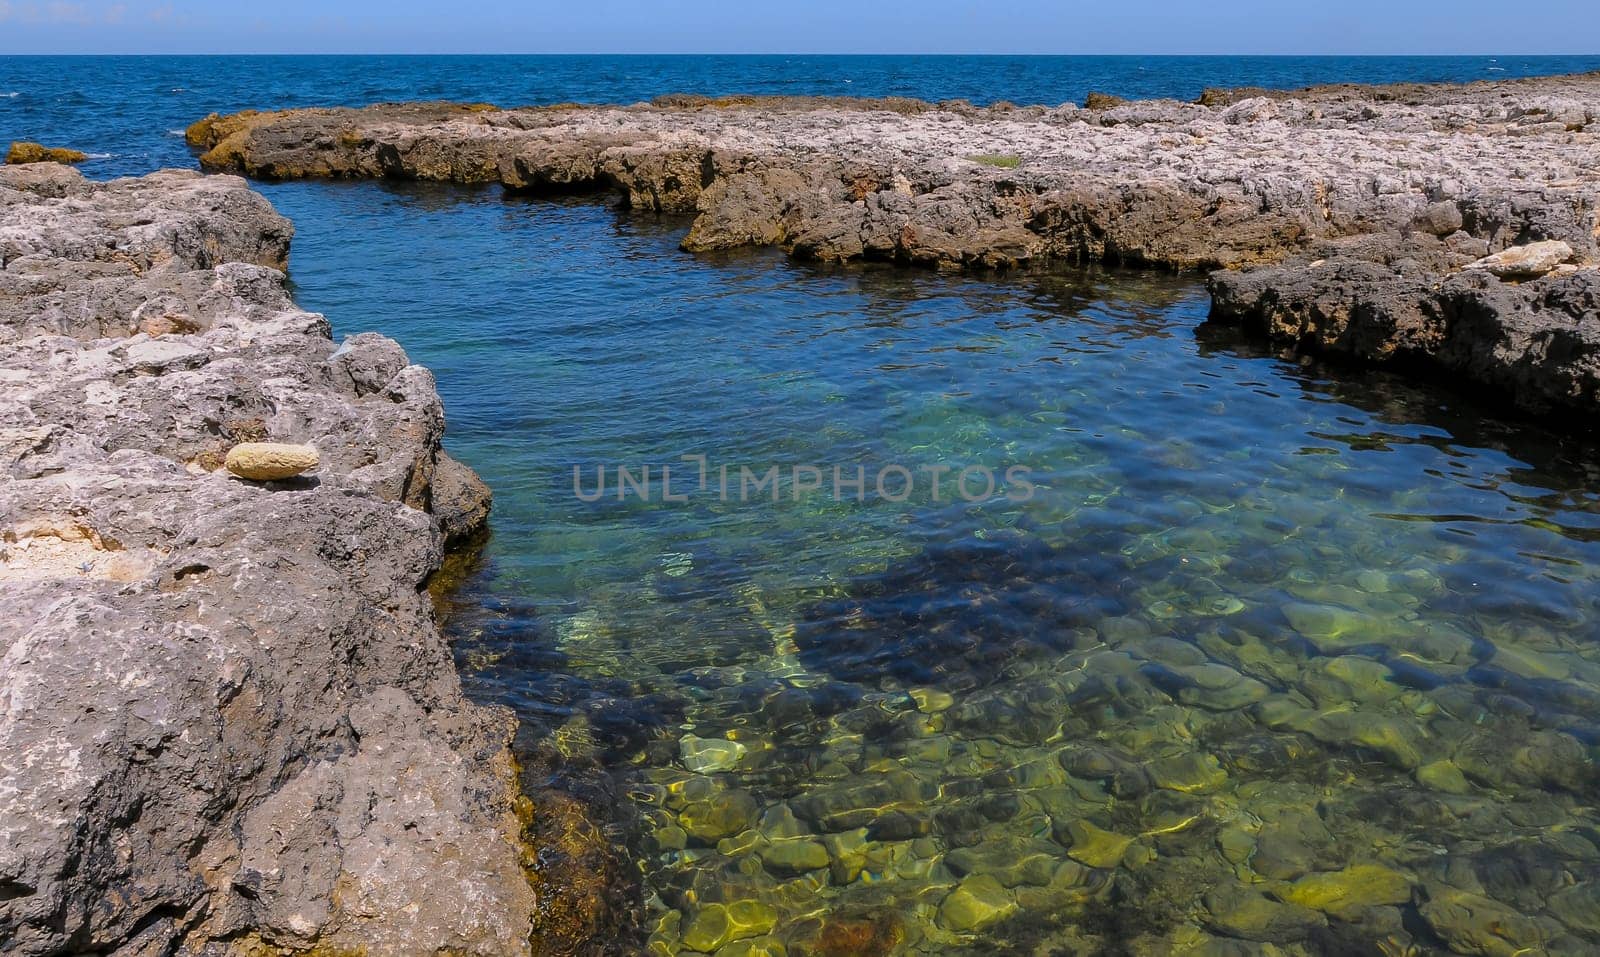 Karst cavity failure in the rocky shore, flooded by water in the eastern Crimea, Black Sea